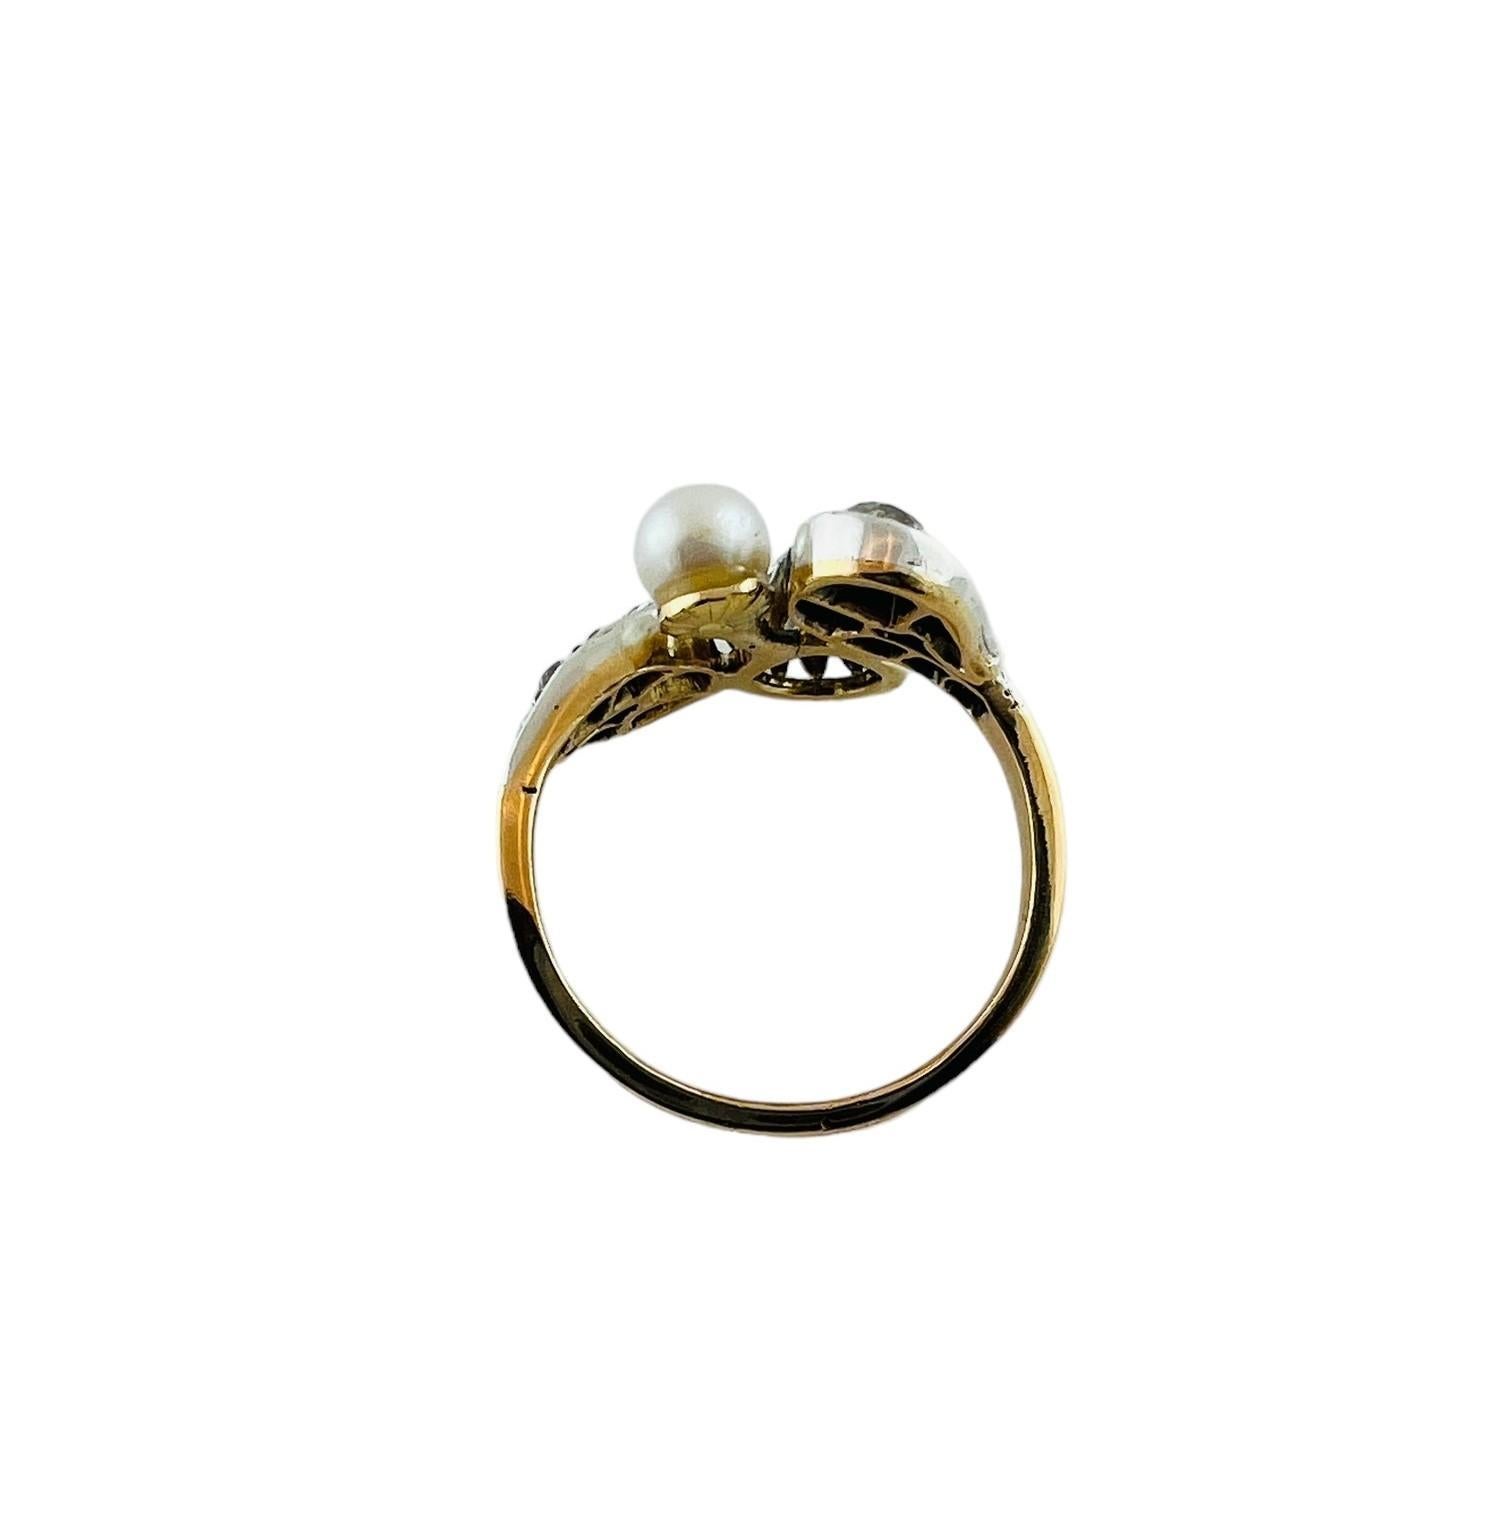 Women's Vintage 14K Yellow and White Gold Diamond and Pearl Ring 1.80cttw #16585 For Sale